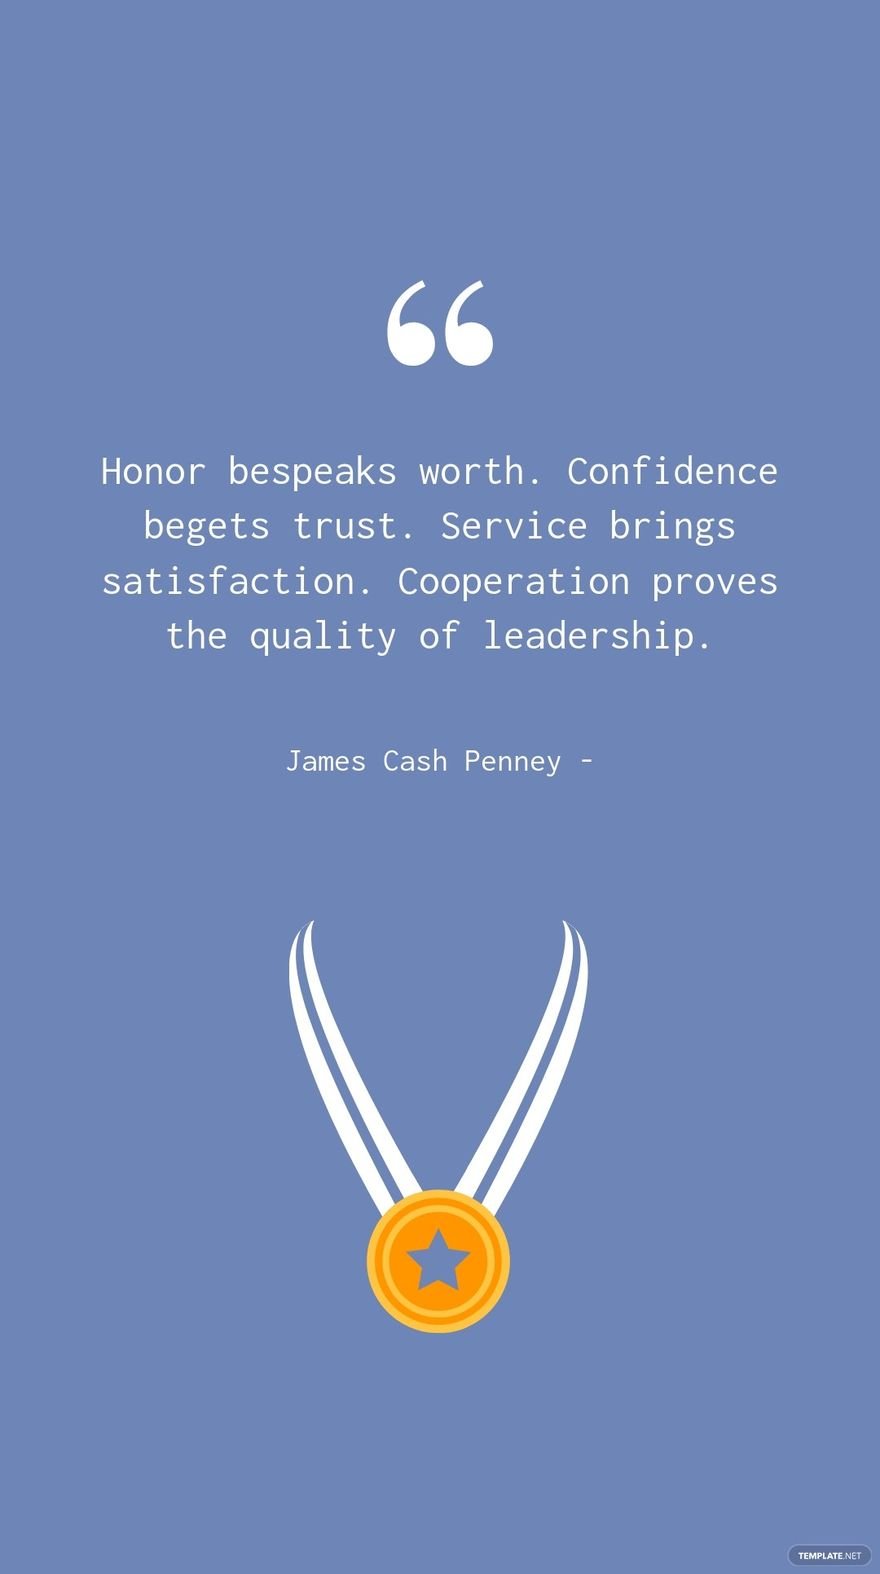 Free James Cash Penney - Honor bespeaks worth. Confidence begets trust. Service brings satisfaction. Cooperation proves the quality of leadership. in JPG